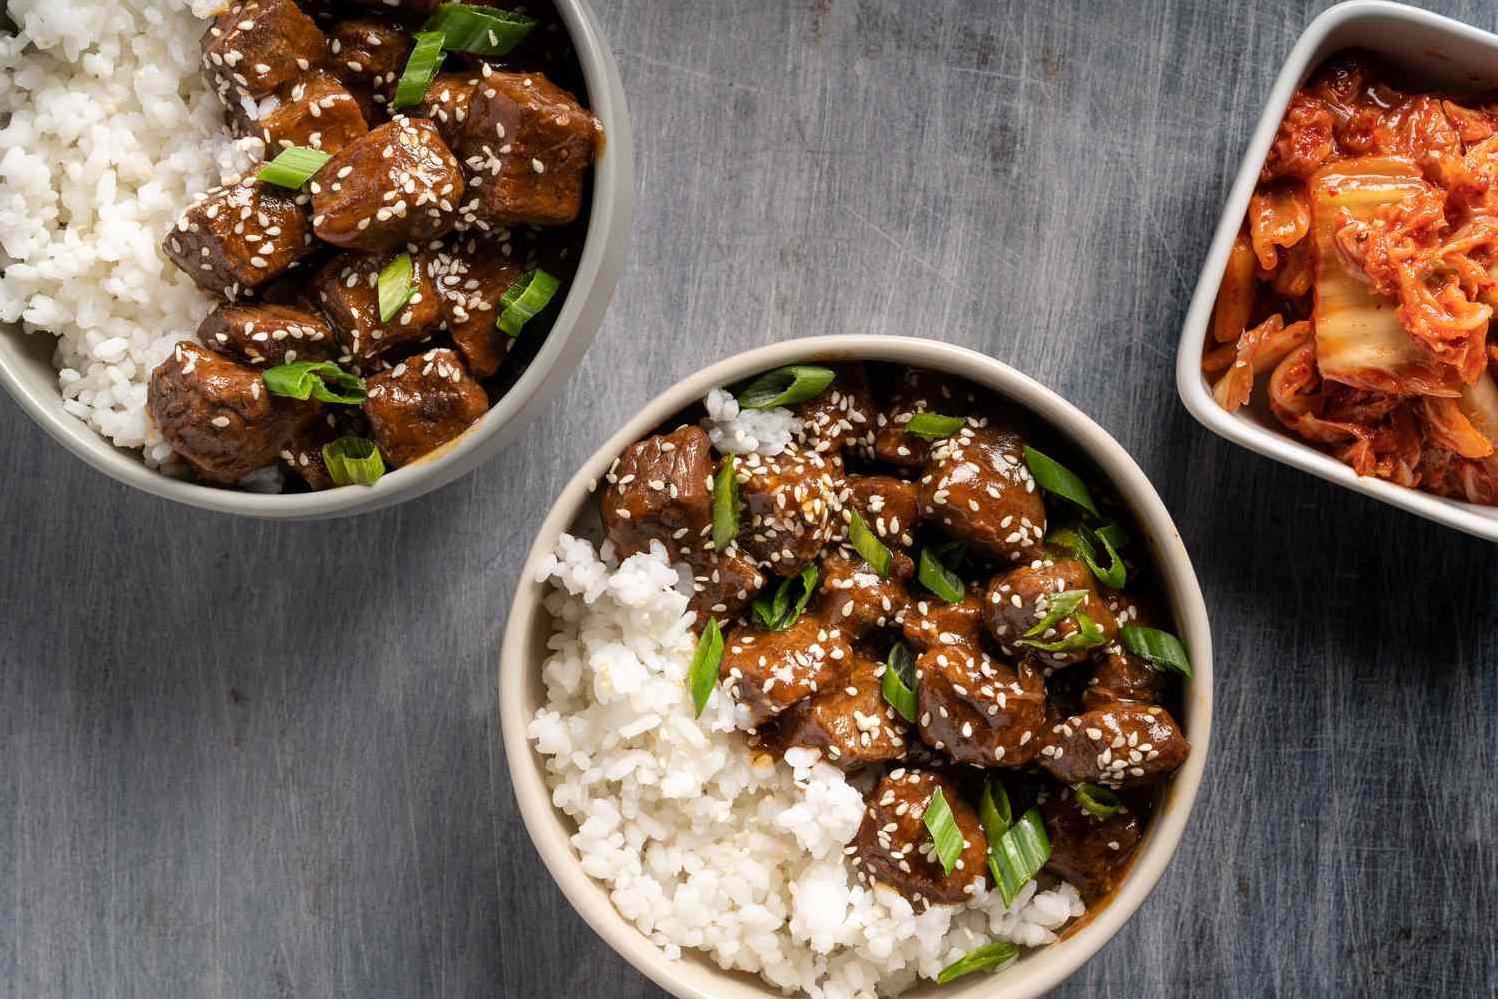  Dive into the flavors of Korean cuisine with this delicious Instant Pot Korean beef.